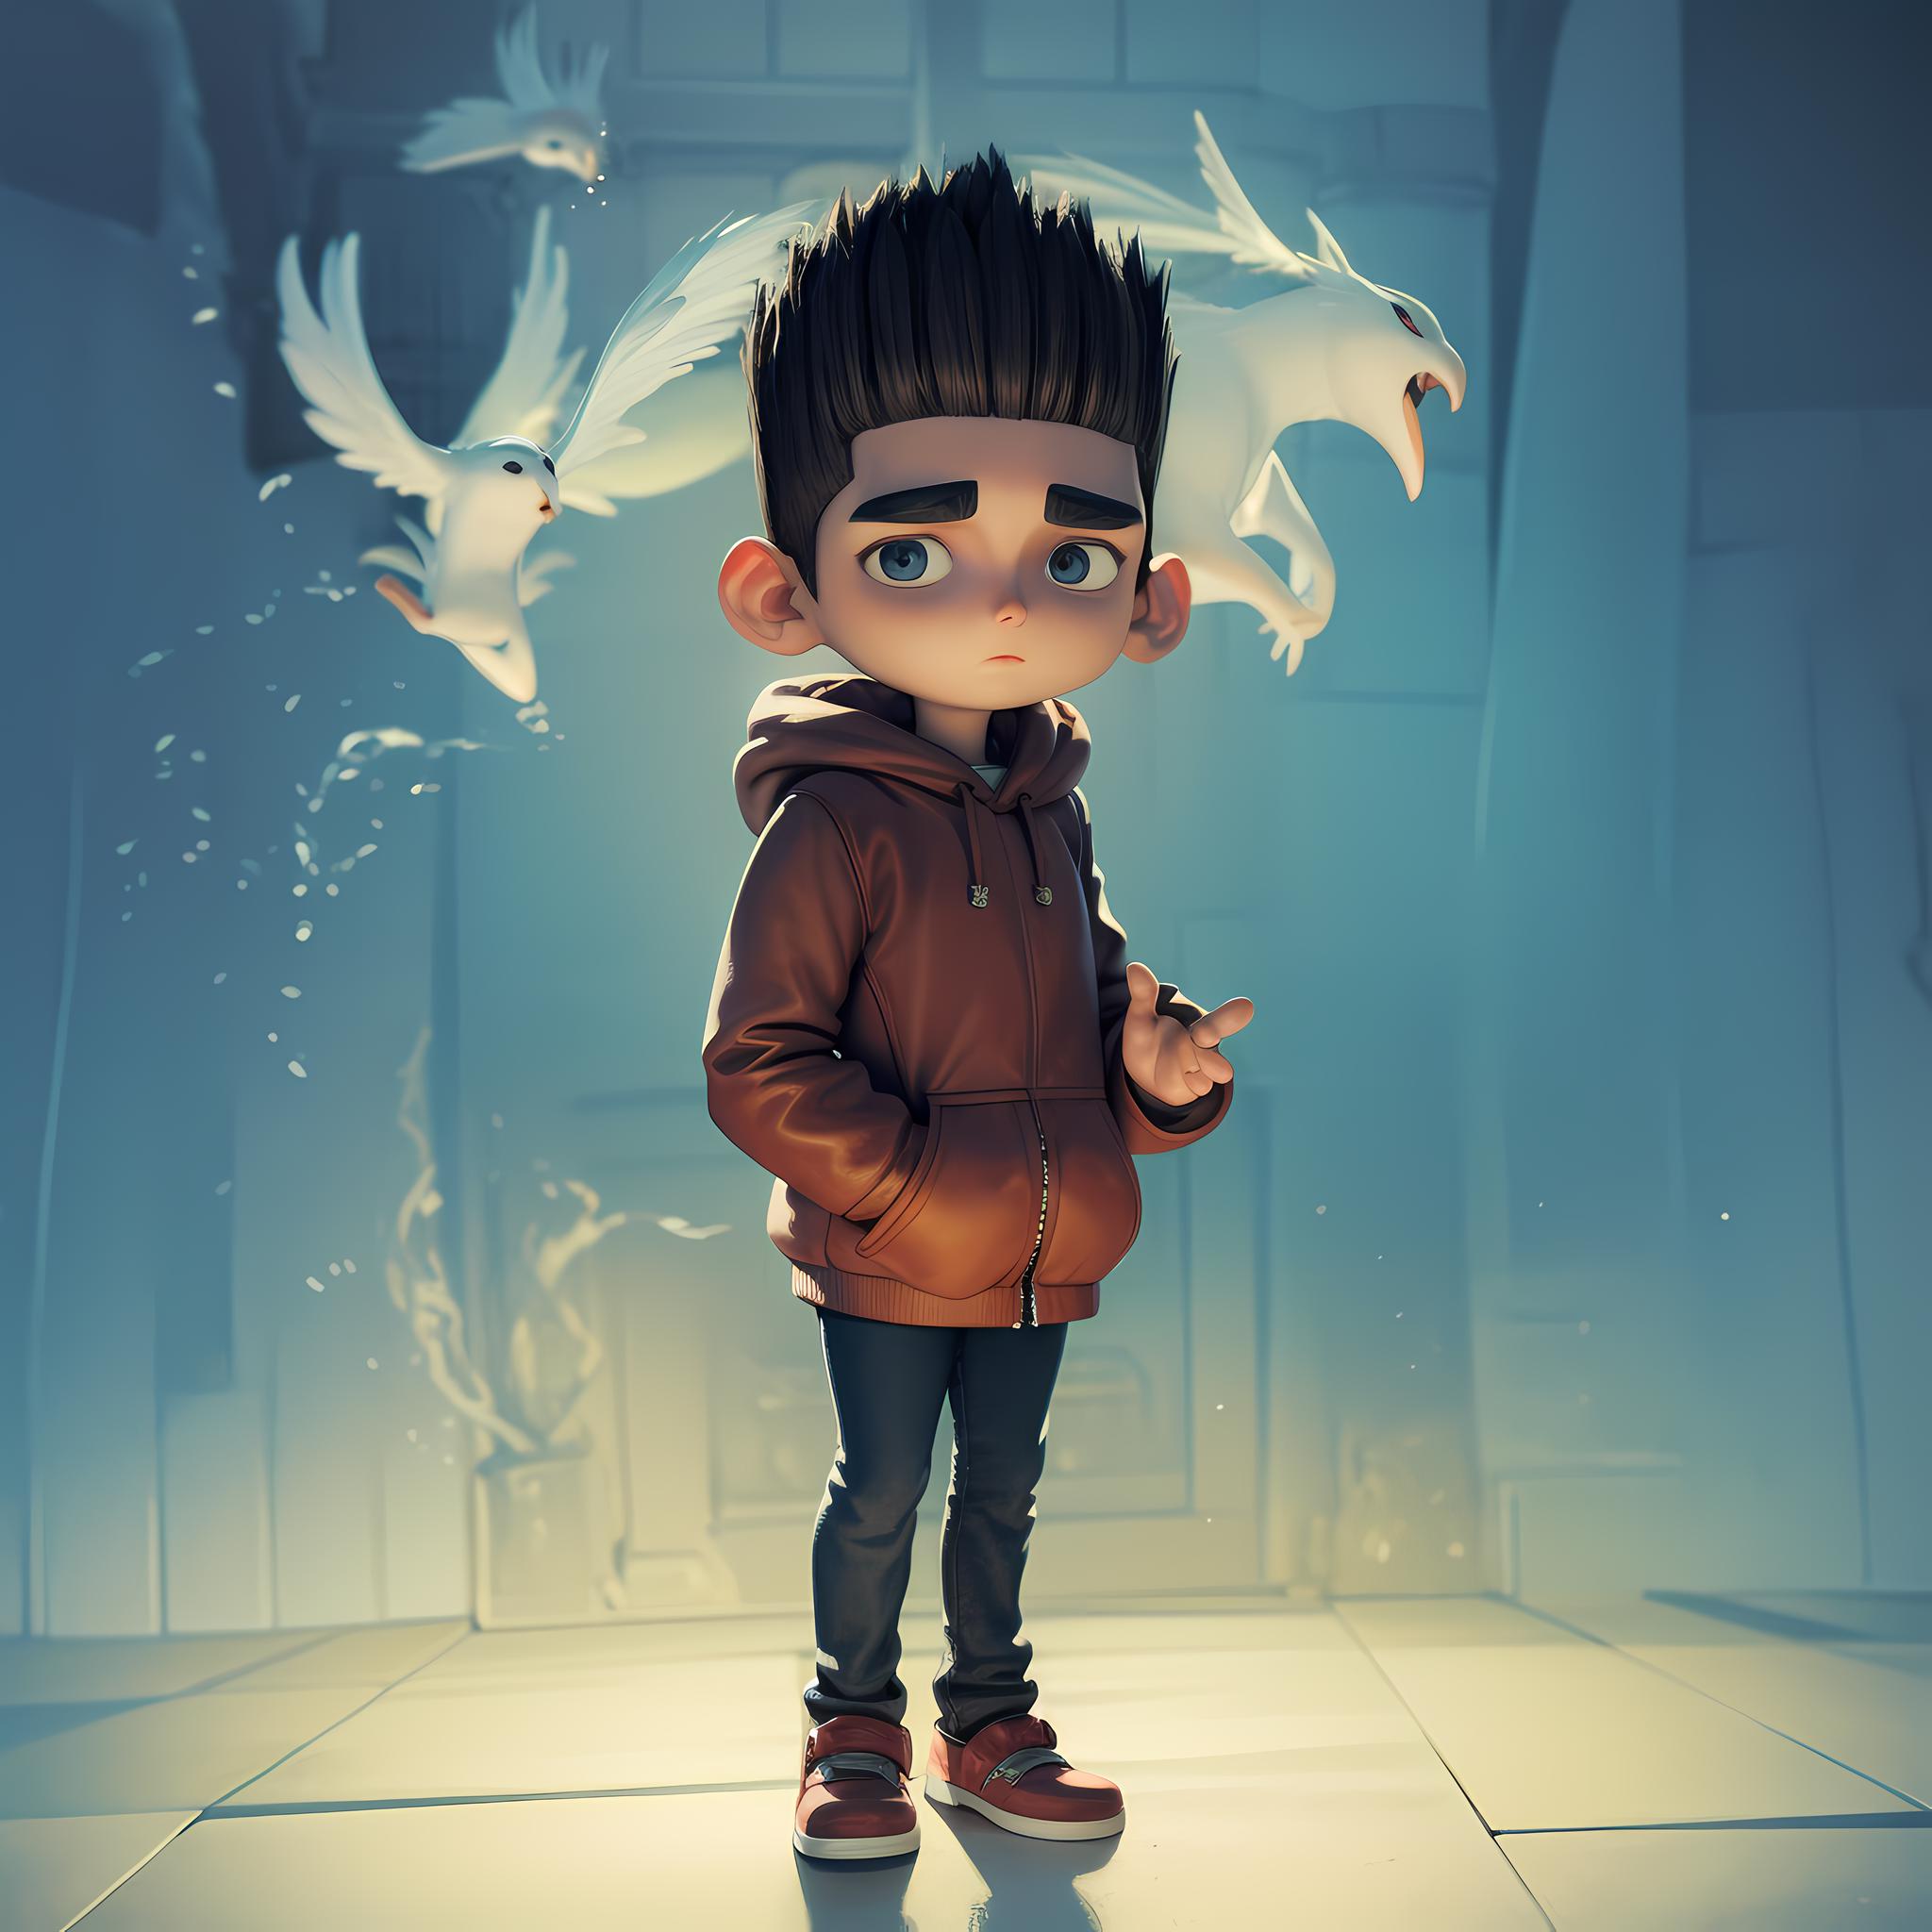 Norman [ ParaNorman ] image by TheGooder